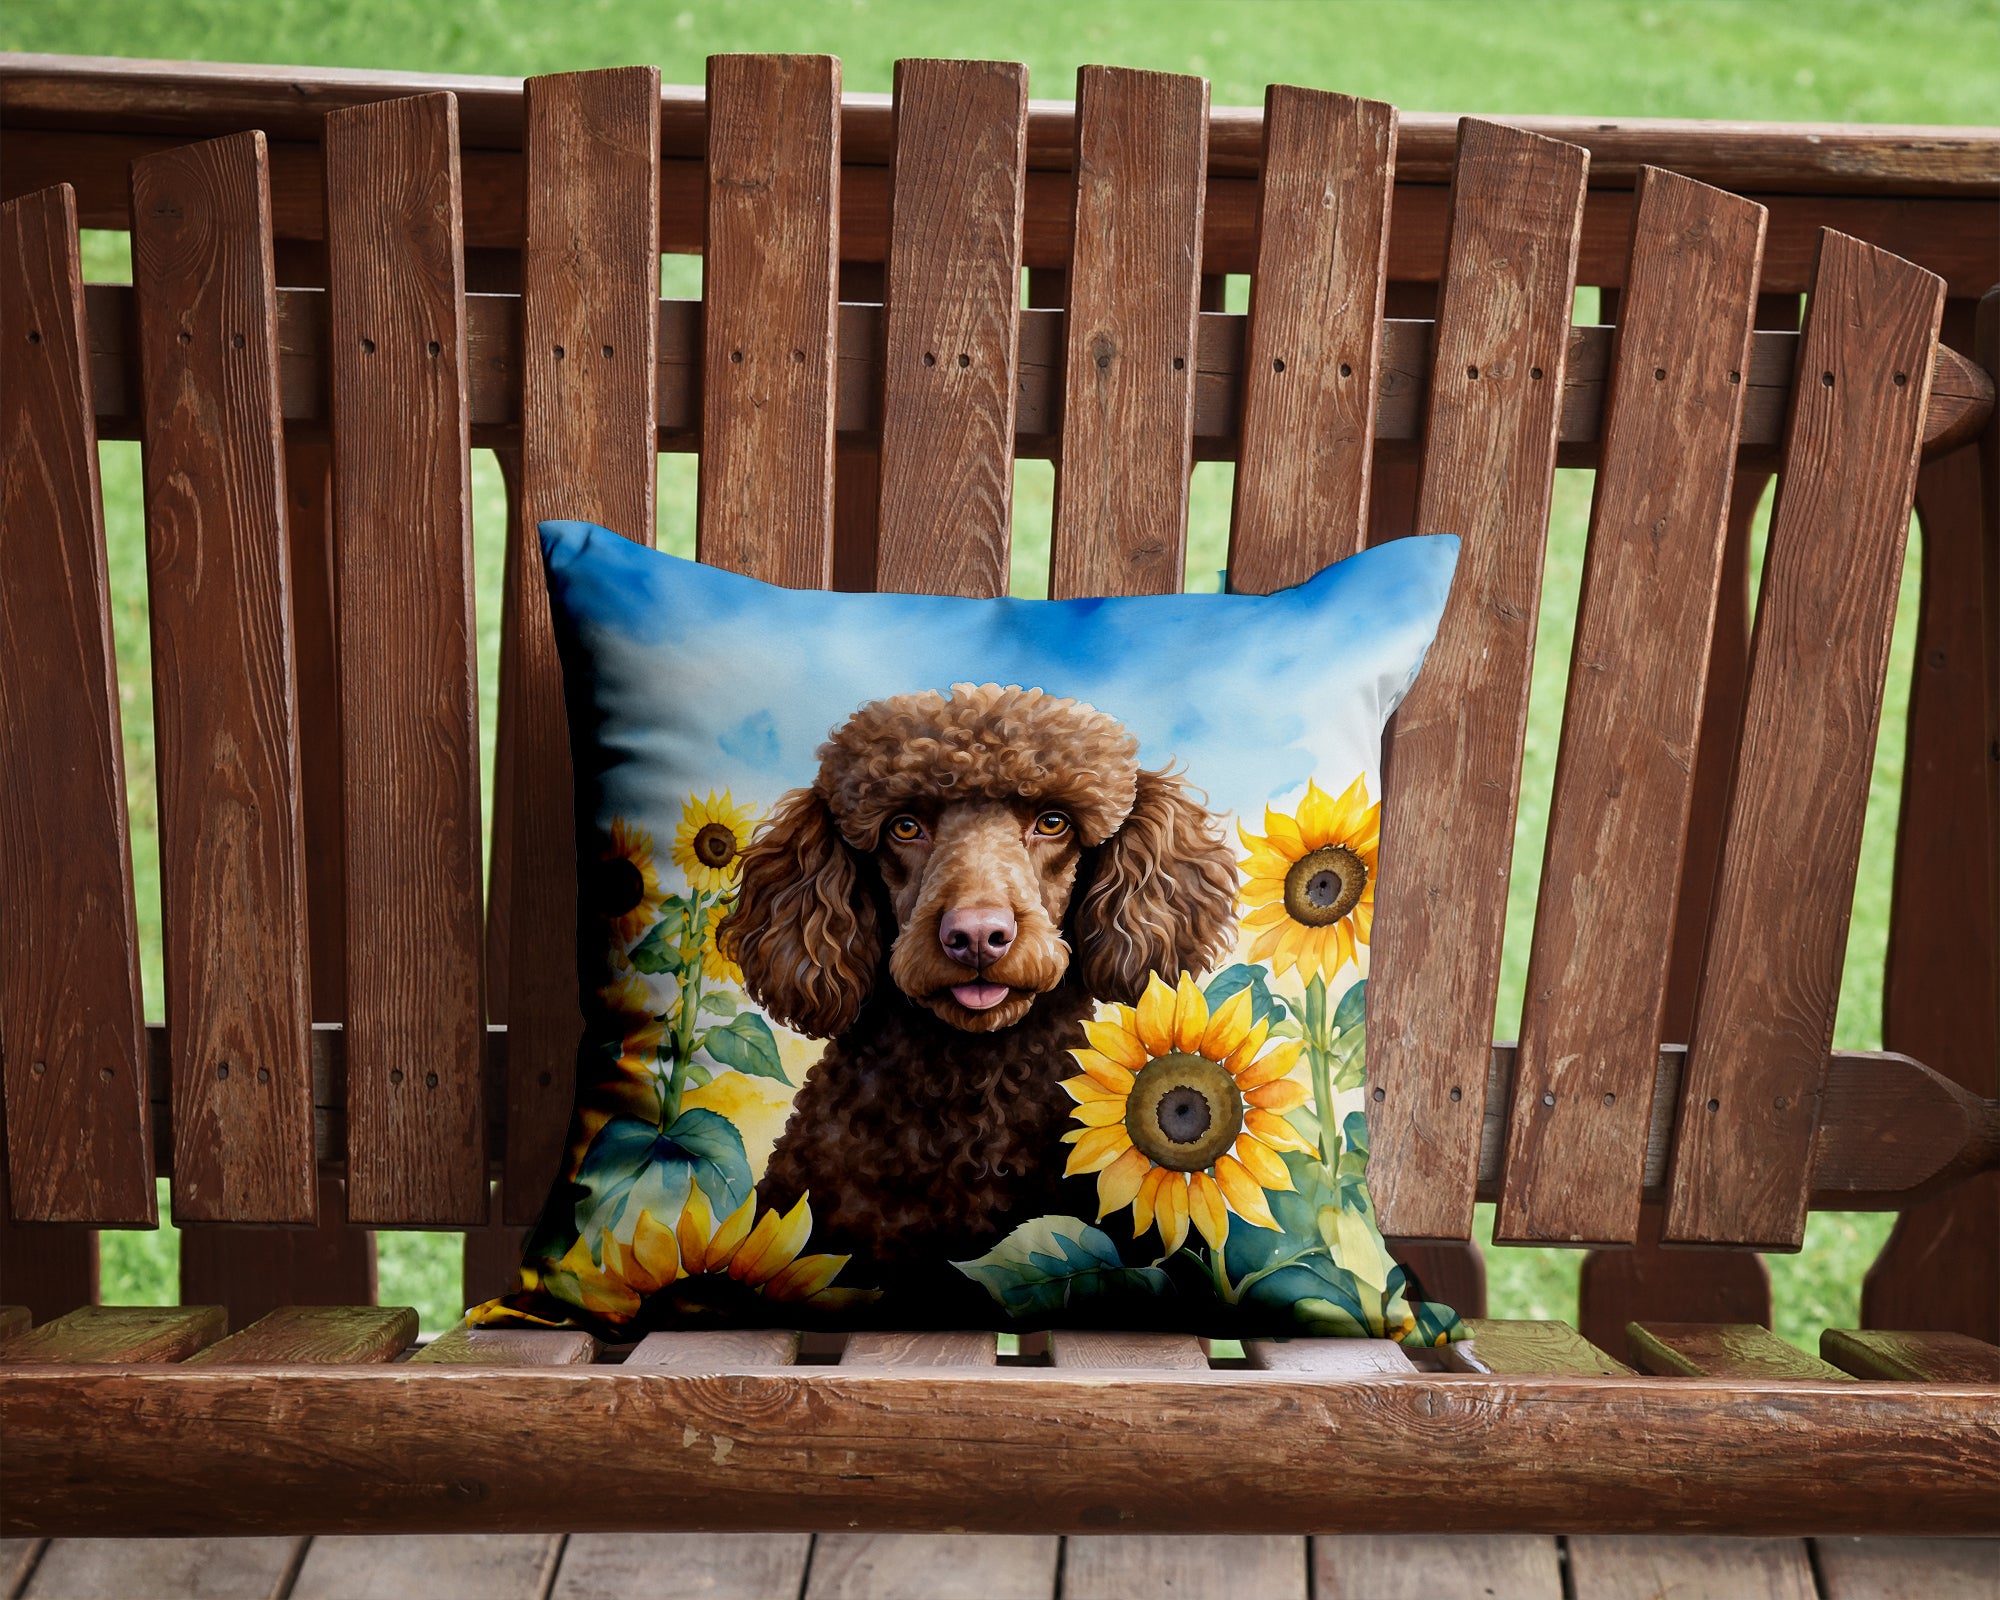 Buy this Chocolate Poodle in Sunflowers Throw Pillow